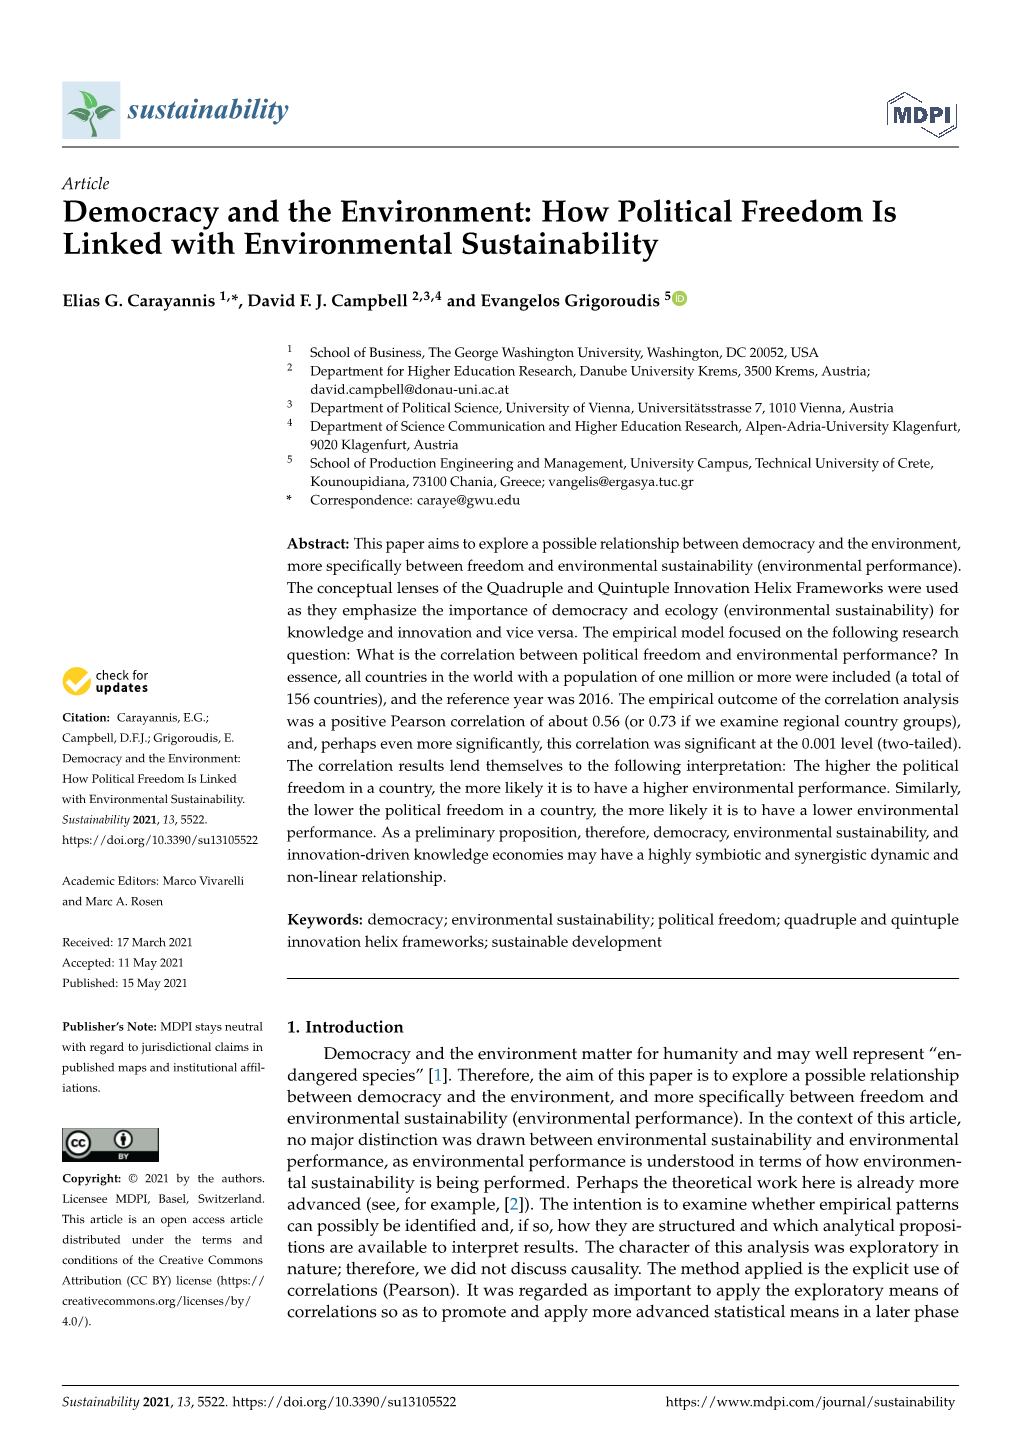 Democracy and the Environment: How Political Freedom Is Linked with Environmental Sustainability